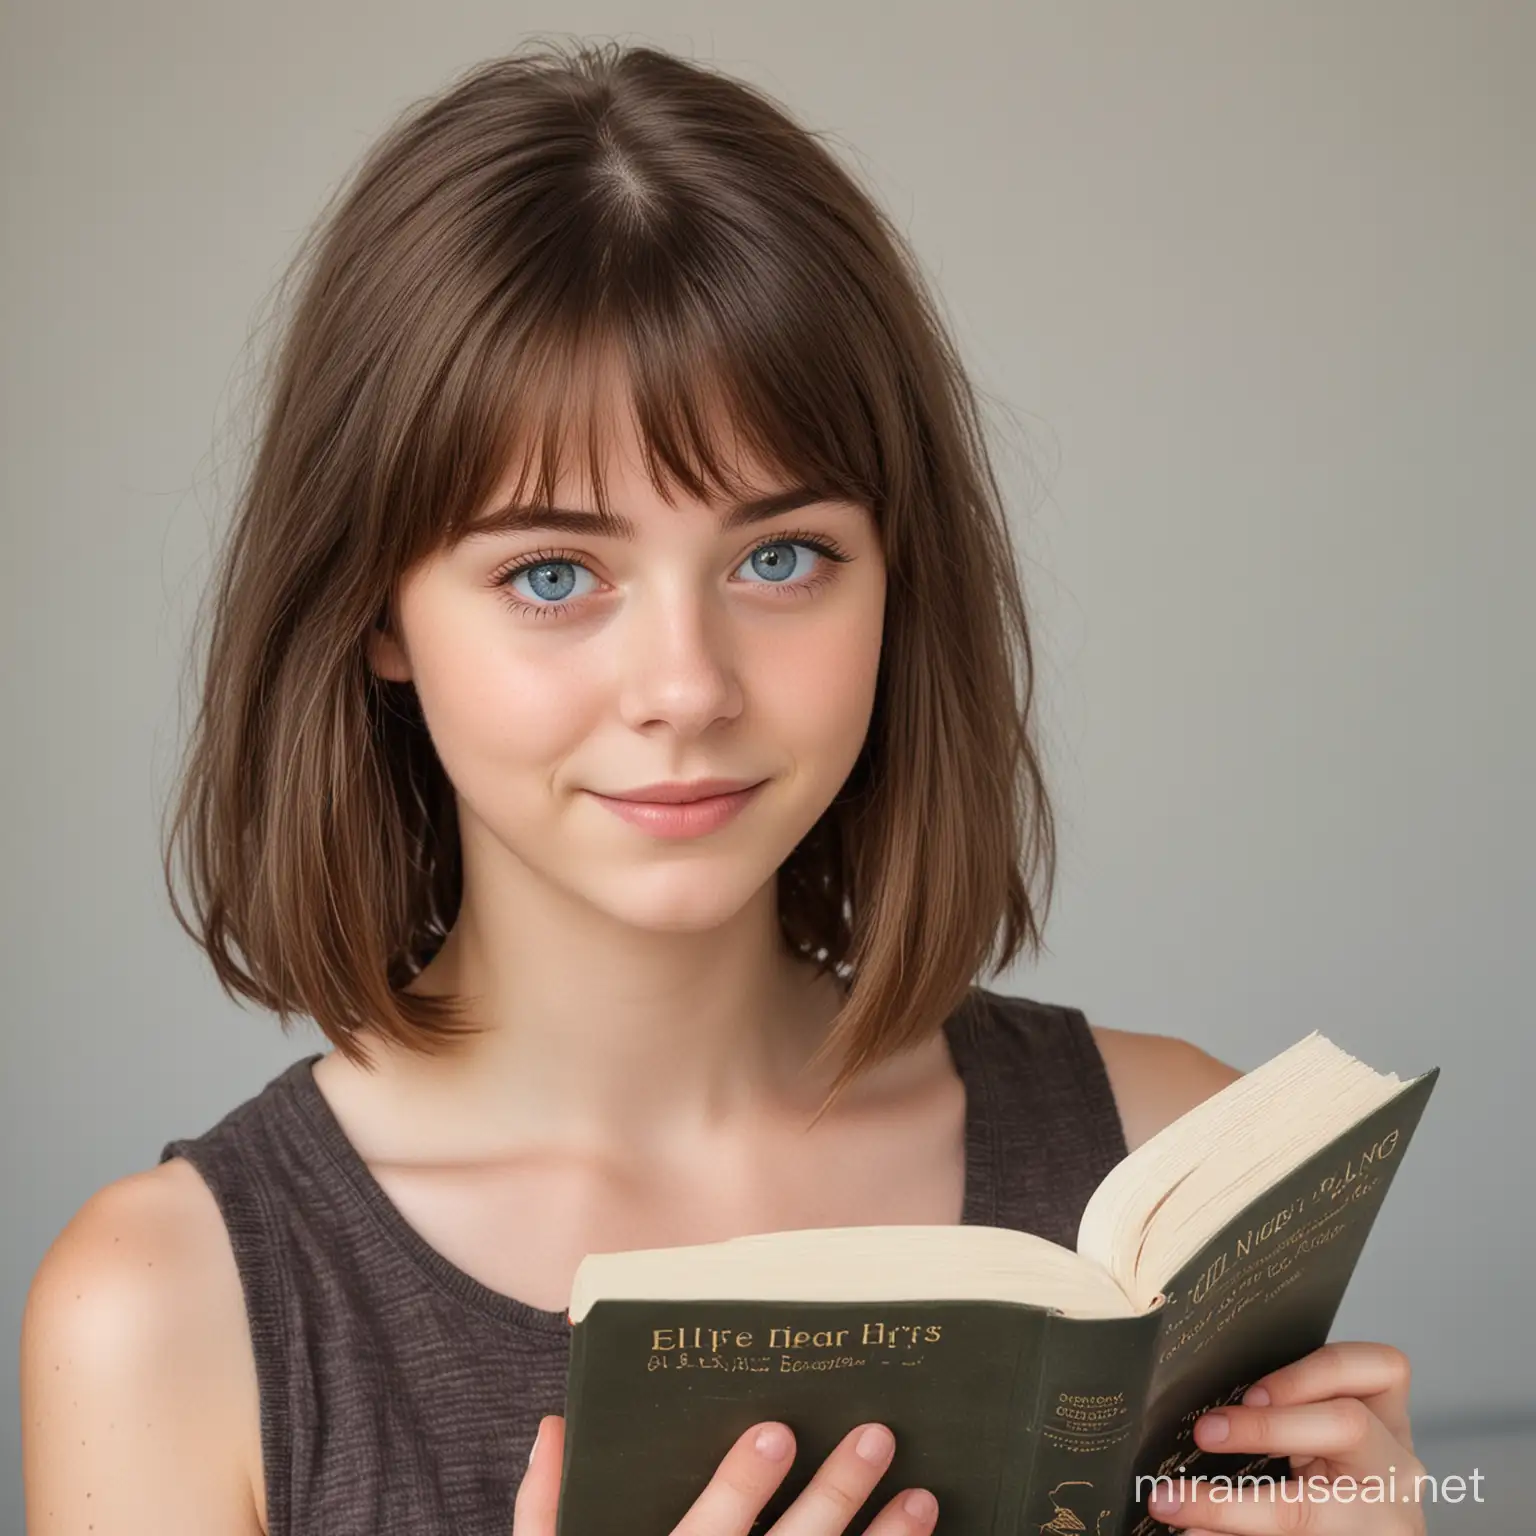 Teenage Girl Reading Book with Brown Hair and Blue Eyes